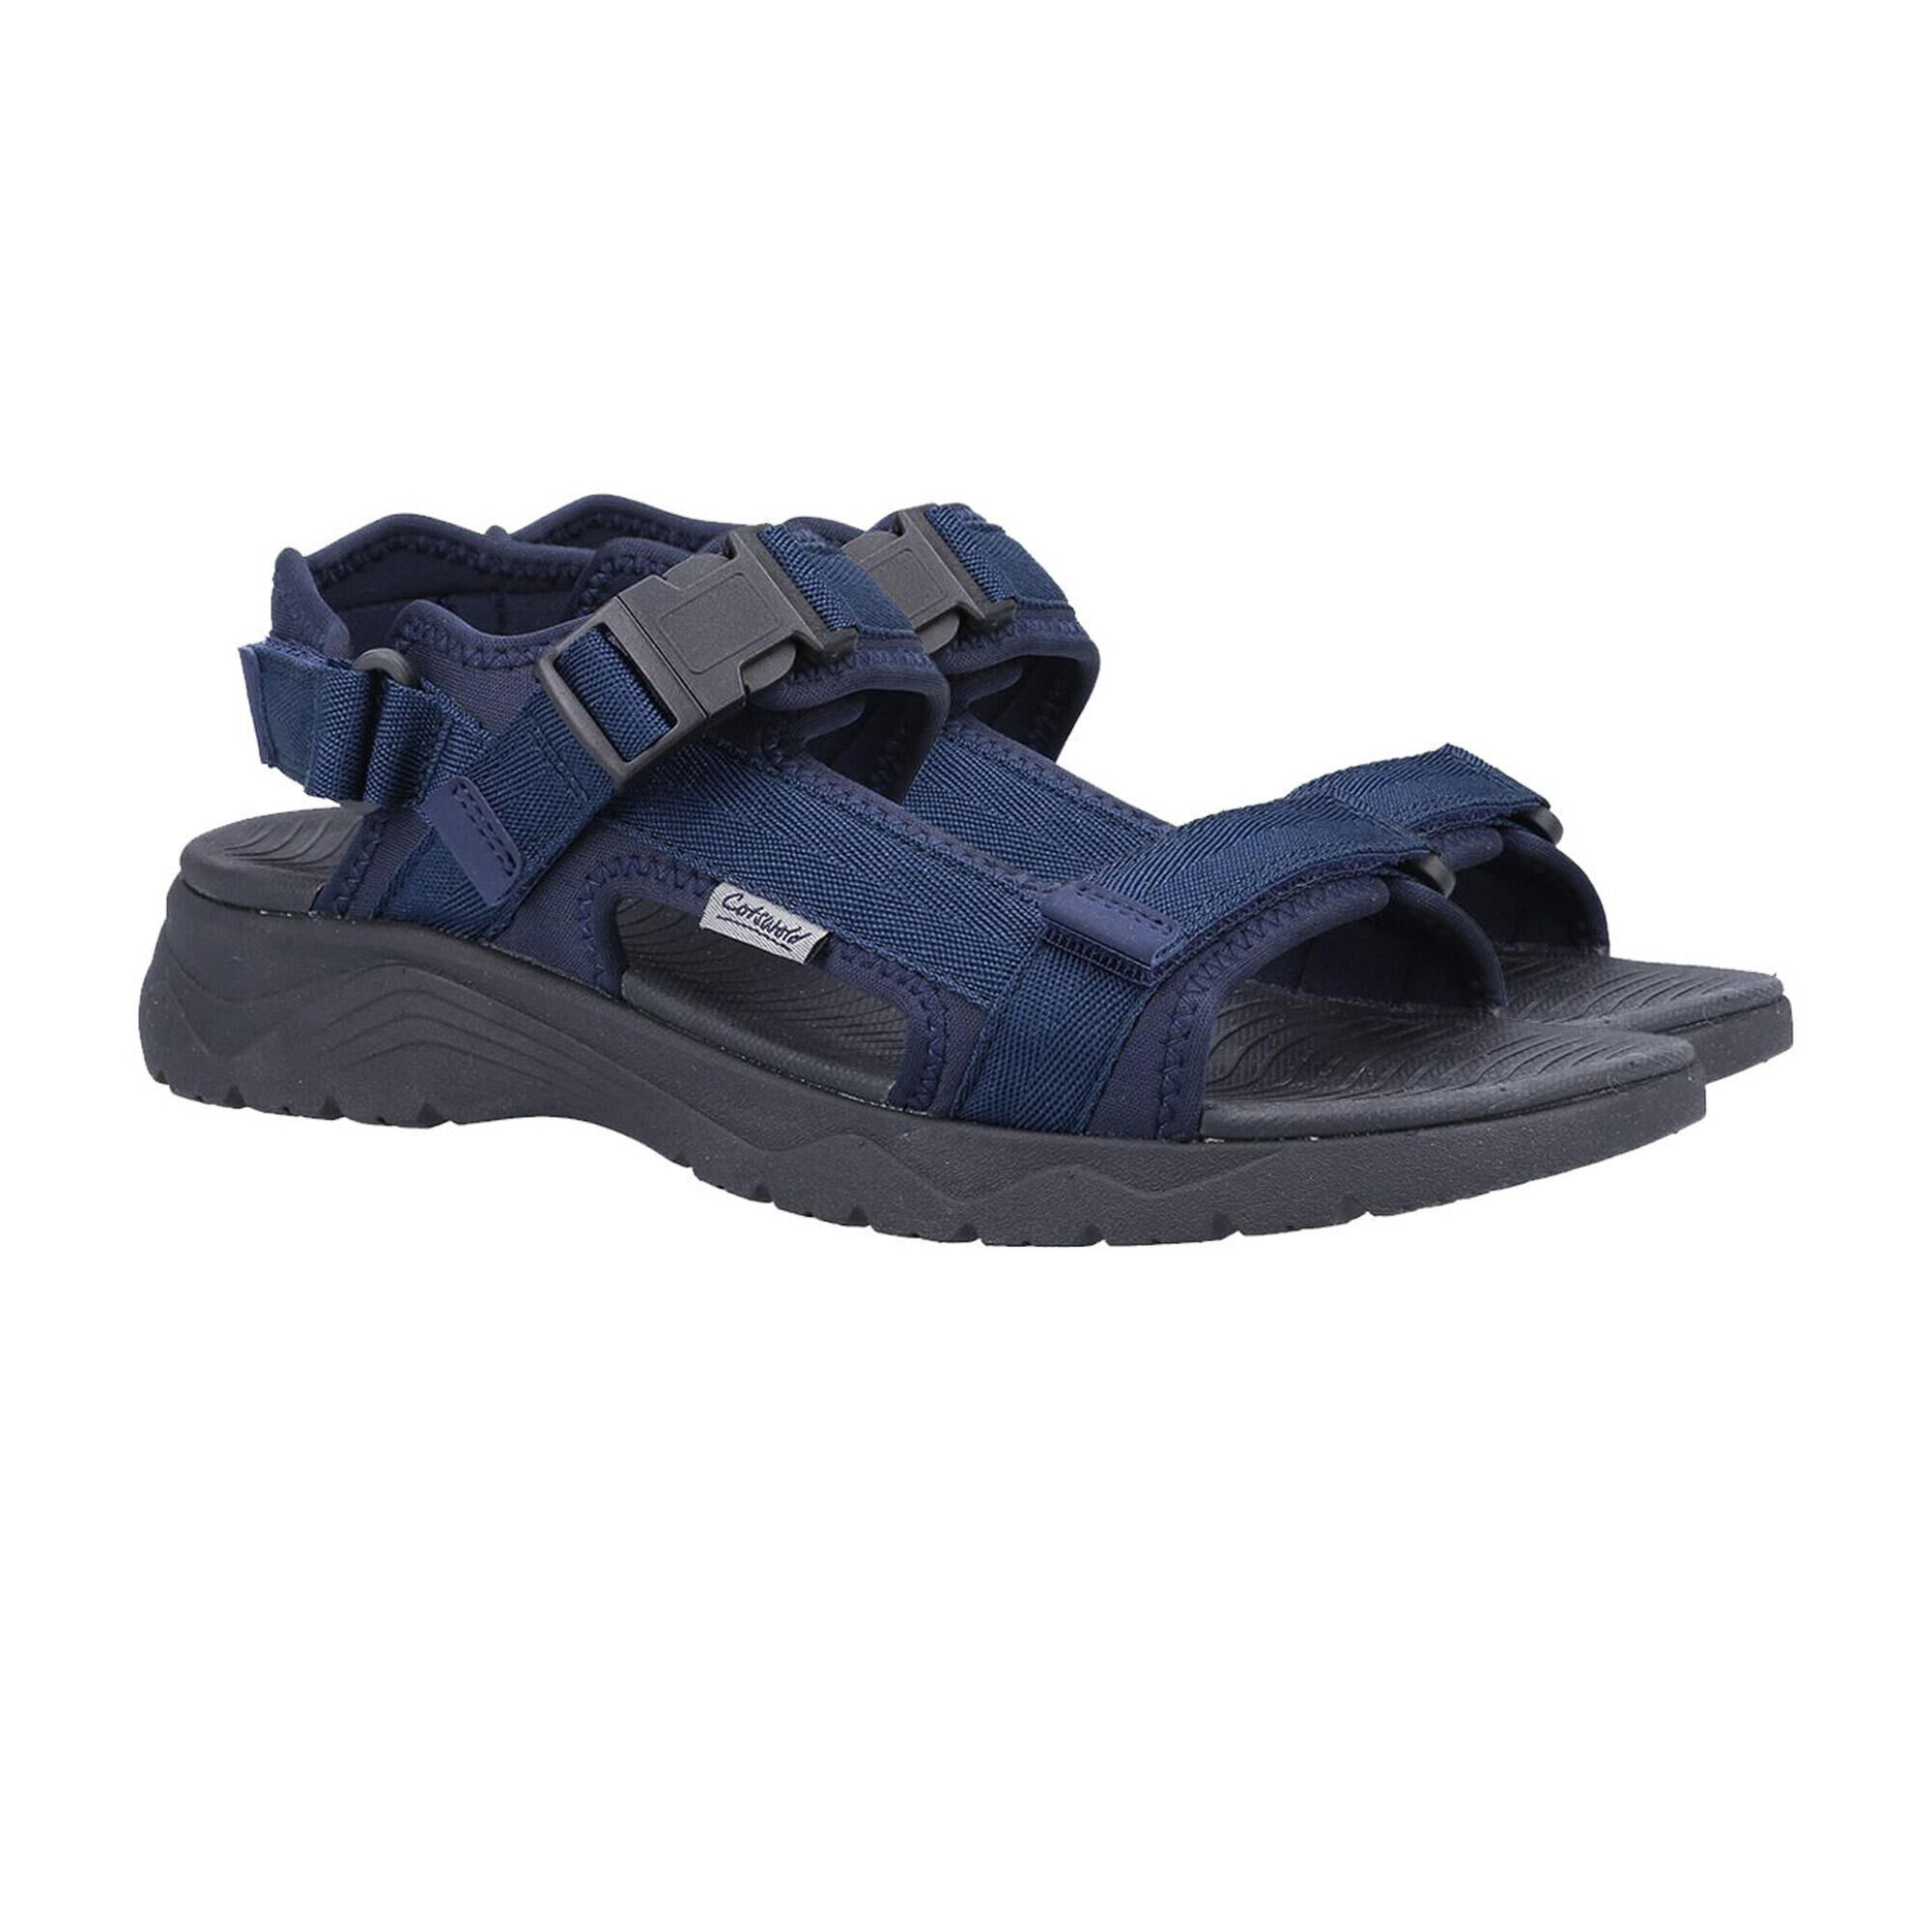 COTSWOLD Mens Buckland Sandals (Navy Blue)